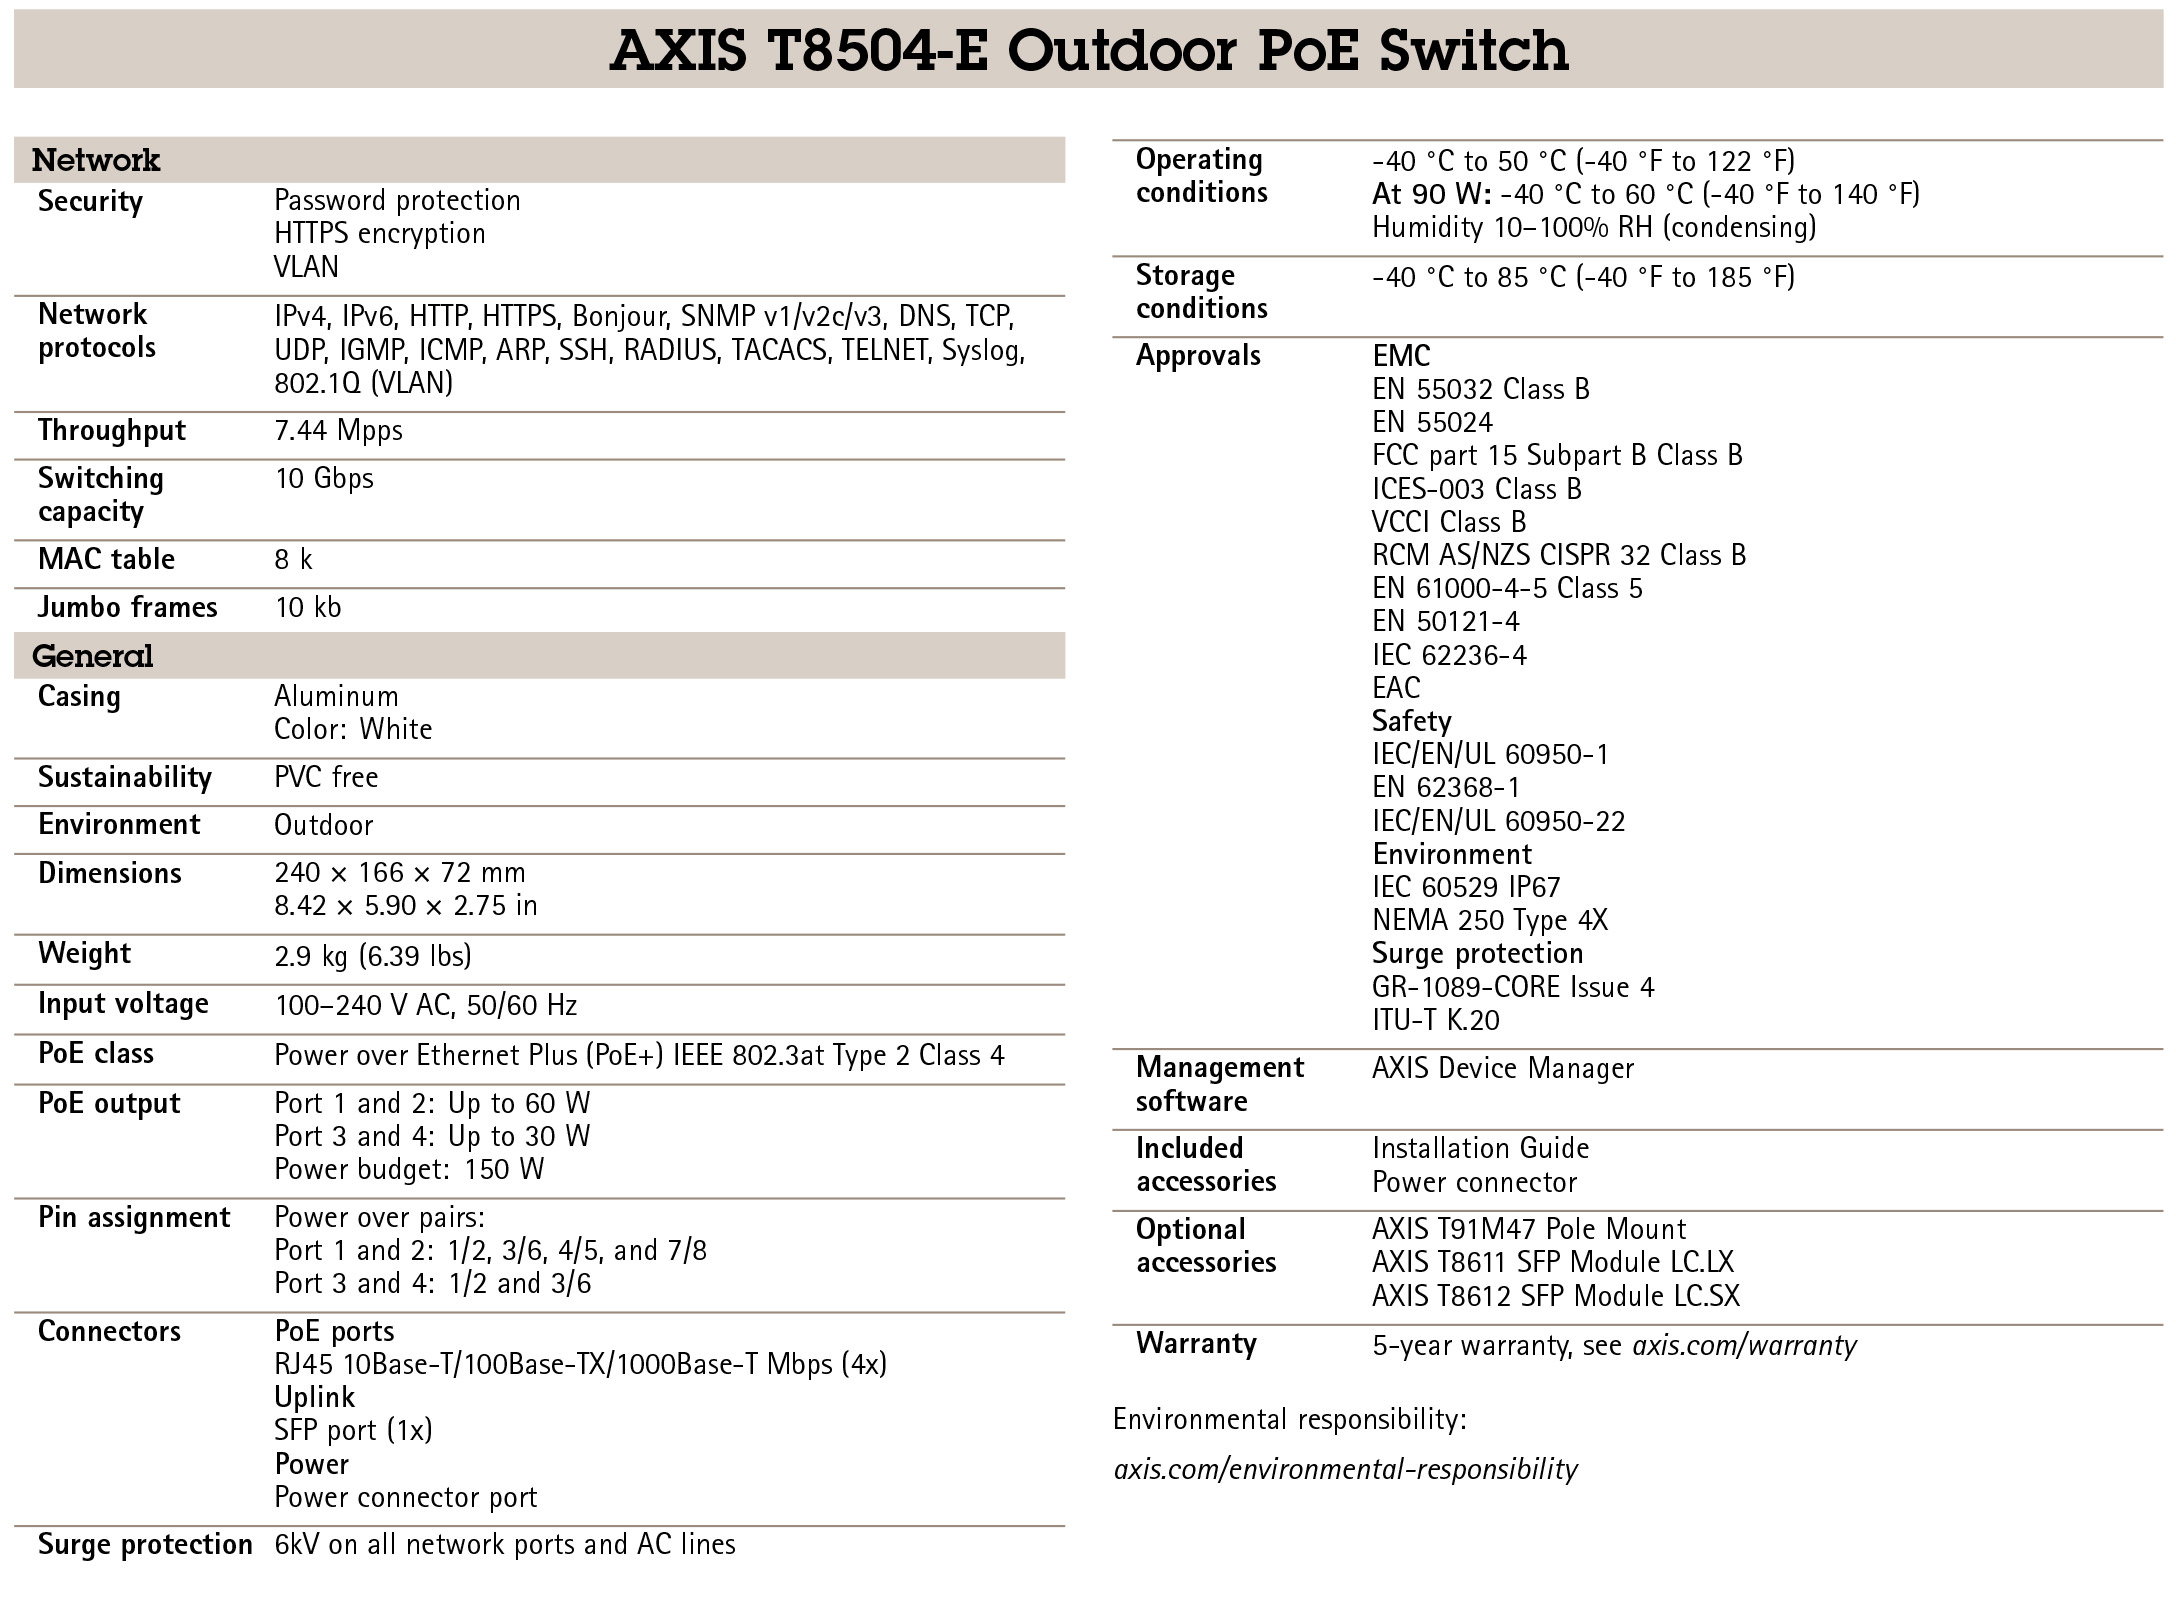 AXIS T8504-E OUTDOOR POE SWITCH
